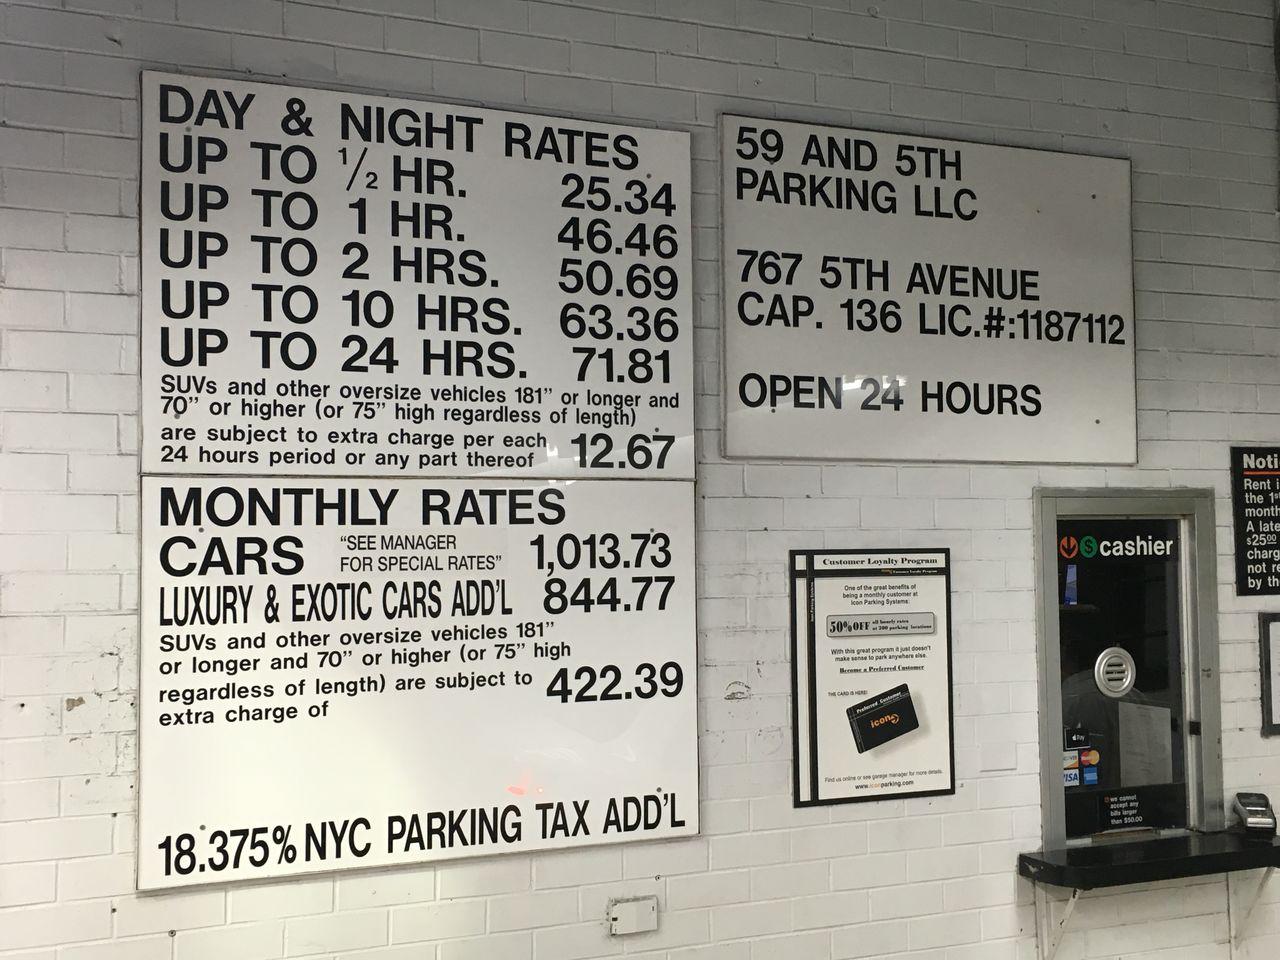 meme - nyc parking prices - 59 And 5TH Parking Llc Day & Night Rates Up To 2 Hr. Up To 1 Hr. 25.34 Up To 2 Hrs. 50.69 46.46 Up To 10 Hrs. 63.36 Up To 24 Hrs. 71.81 767 5TH Avenue Cap. 136 Lic.#1187112 Open 24 Hours SUVs and other oversize vehicles 181" or